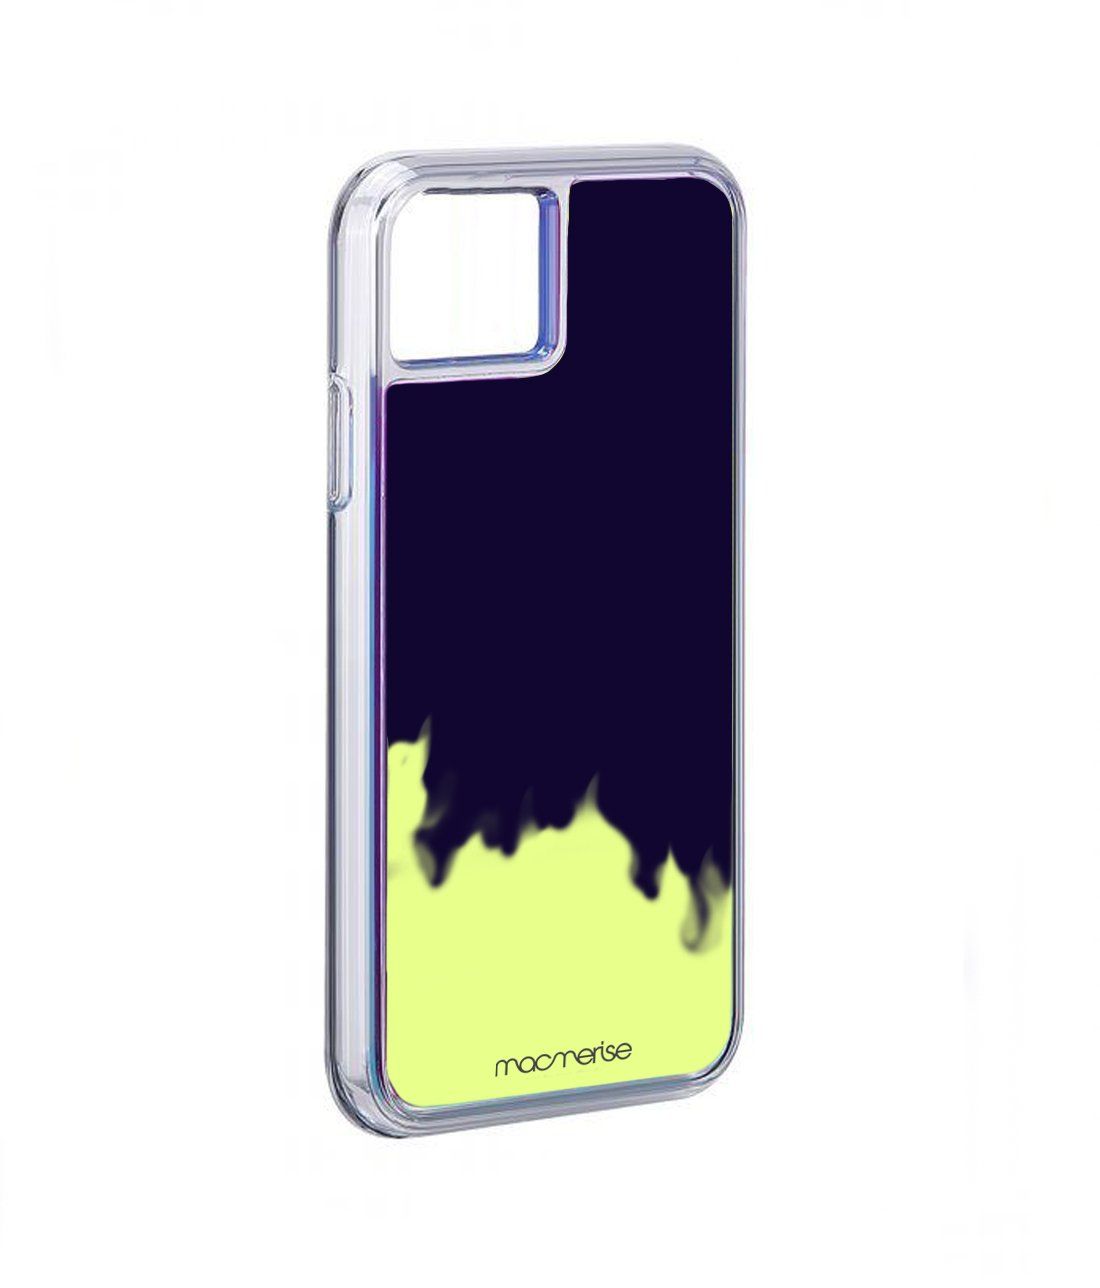 Neon Sand Blue - Neon Sand Phone Case for iPhone 11